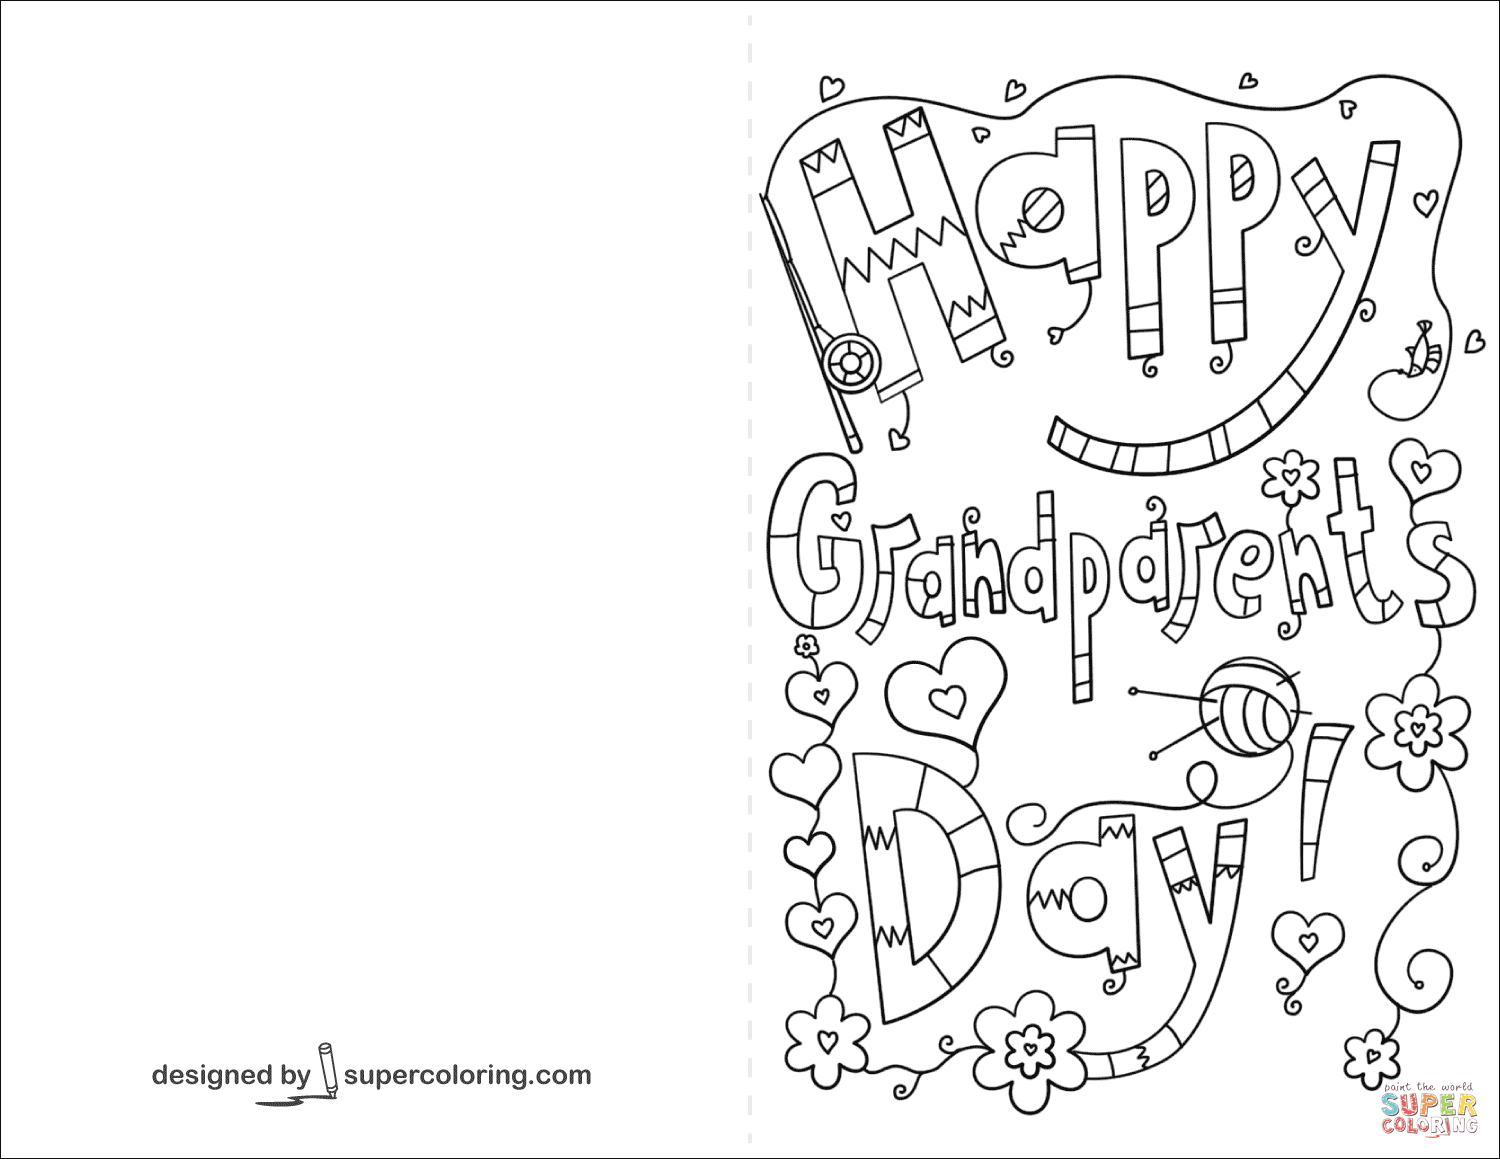 Happy Grandparents Day Doodle Card Coloring Page | Free Printable - Grandparents Day Cards Printable Free